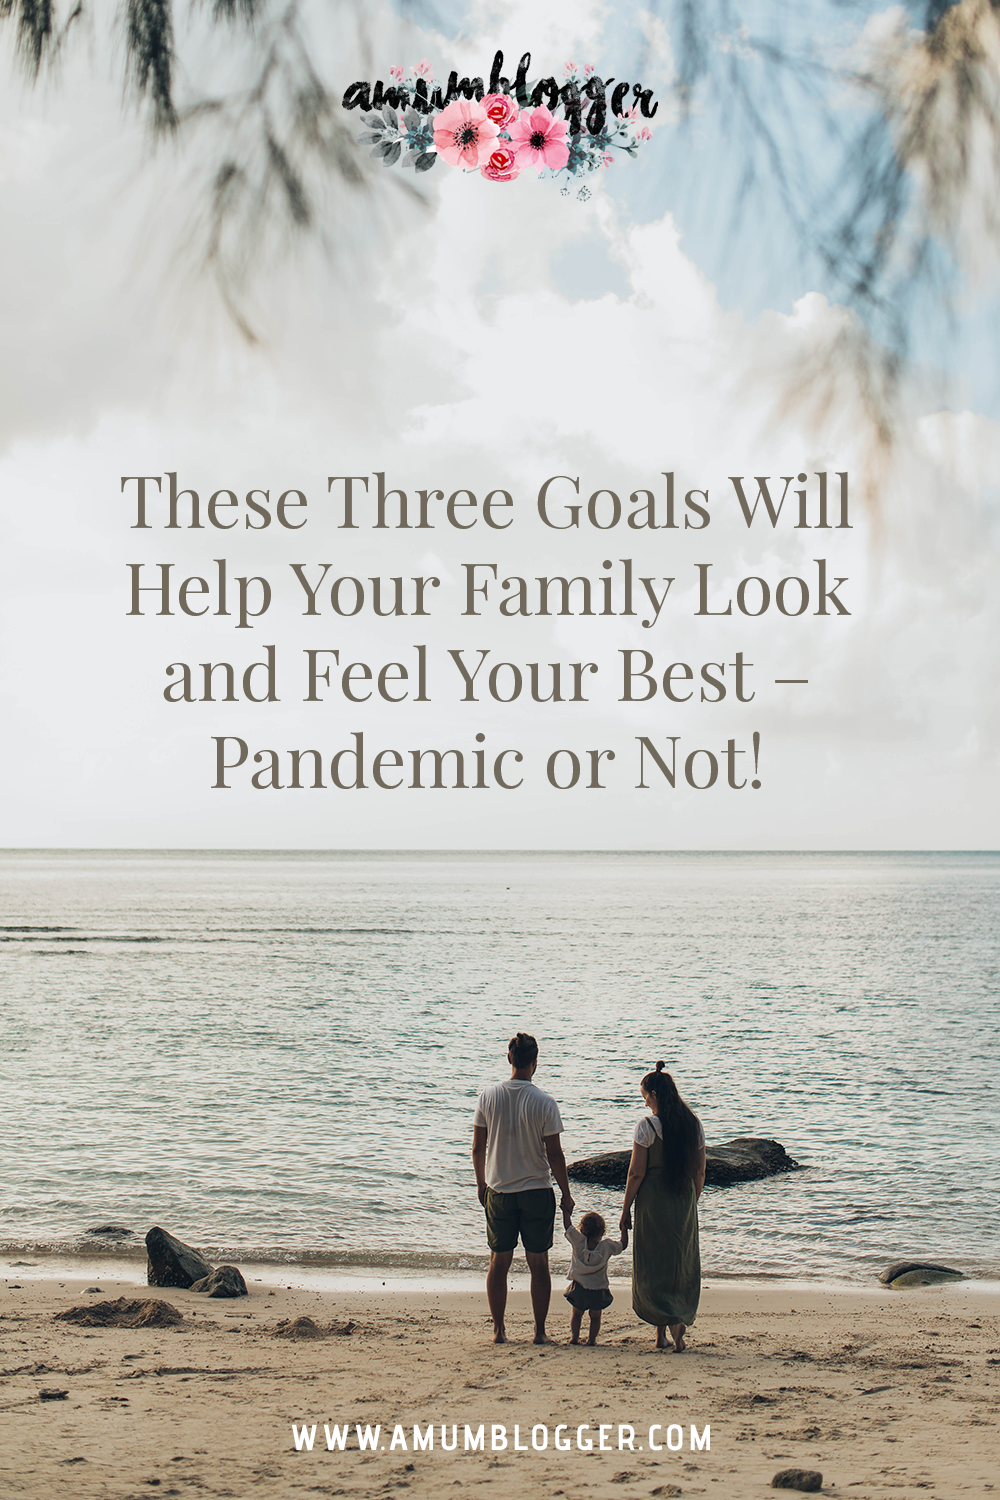 These Three Goals Will Help Your Family Look and Feel Your Best – Pandemic or Not!